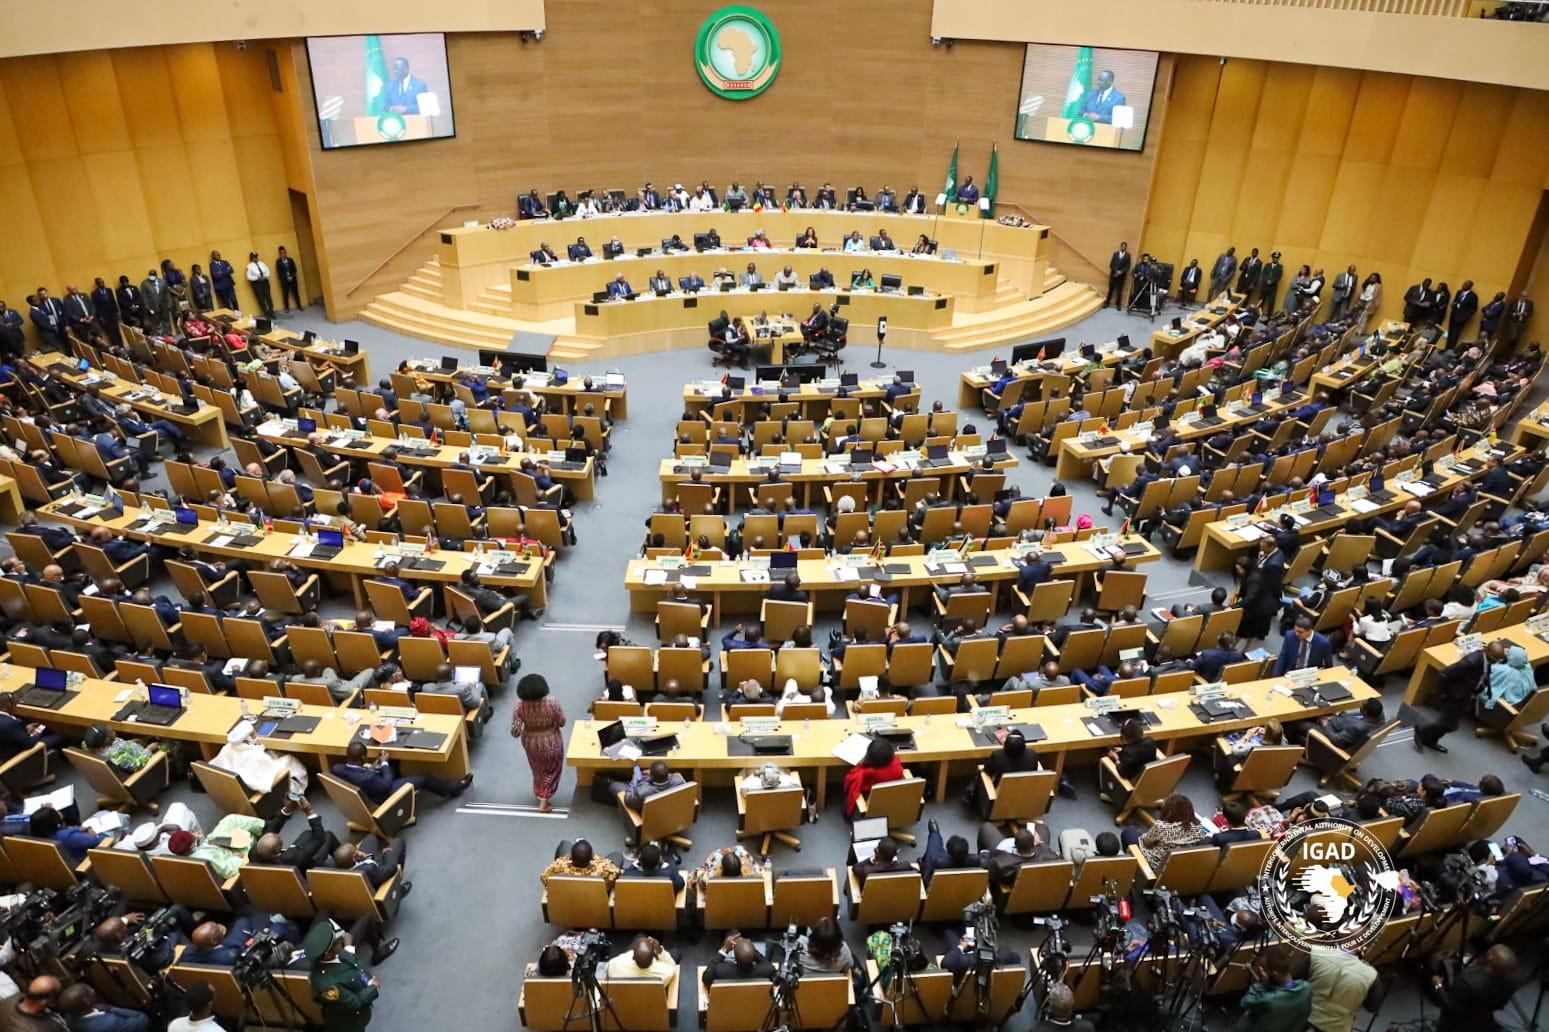 IGAD Executive Secretary Concludes Mission to the 36th African Union Summit